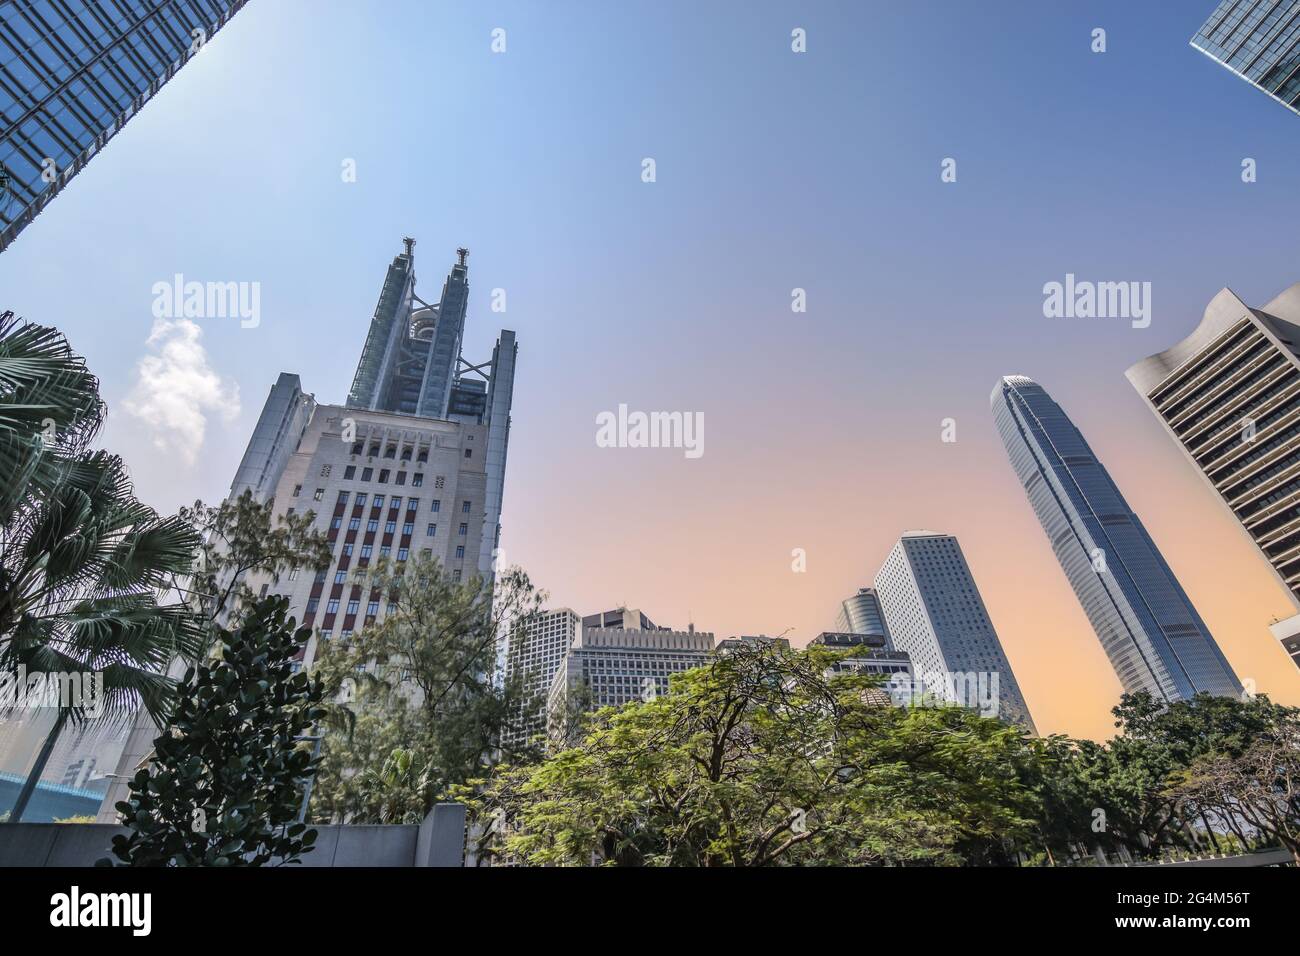 Skyscrapers in central district of Hong Kong city center during sunset. Stock Photo